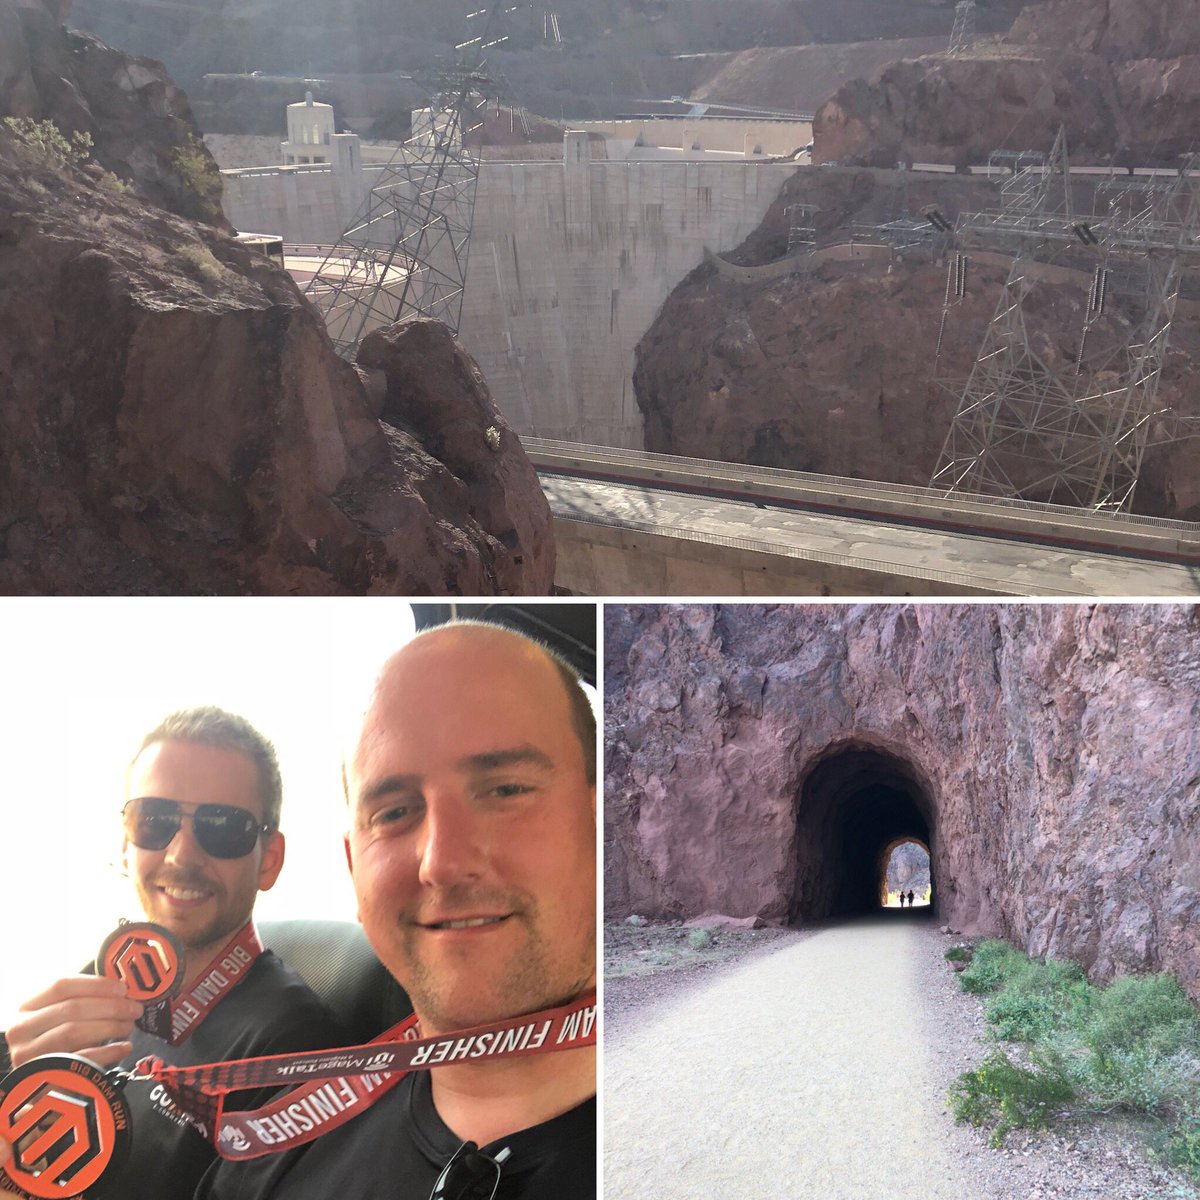 Mathijs_Kok: We just finished #BigDamRun as a kickoff of #magentoImagine accidentally run/walked the 10K 🎉🍻 https://t.co/phBzYNWqYC